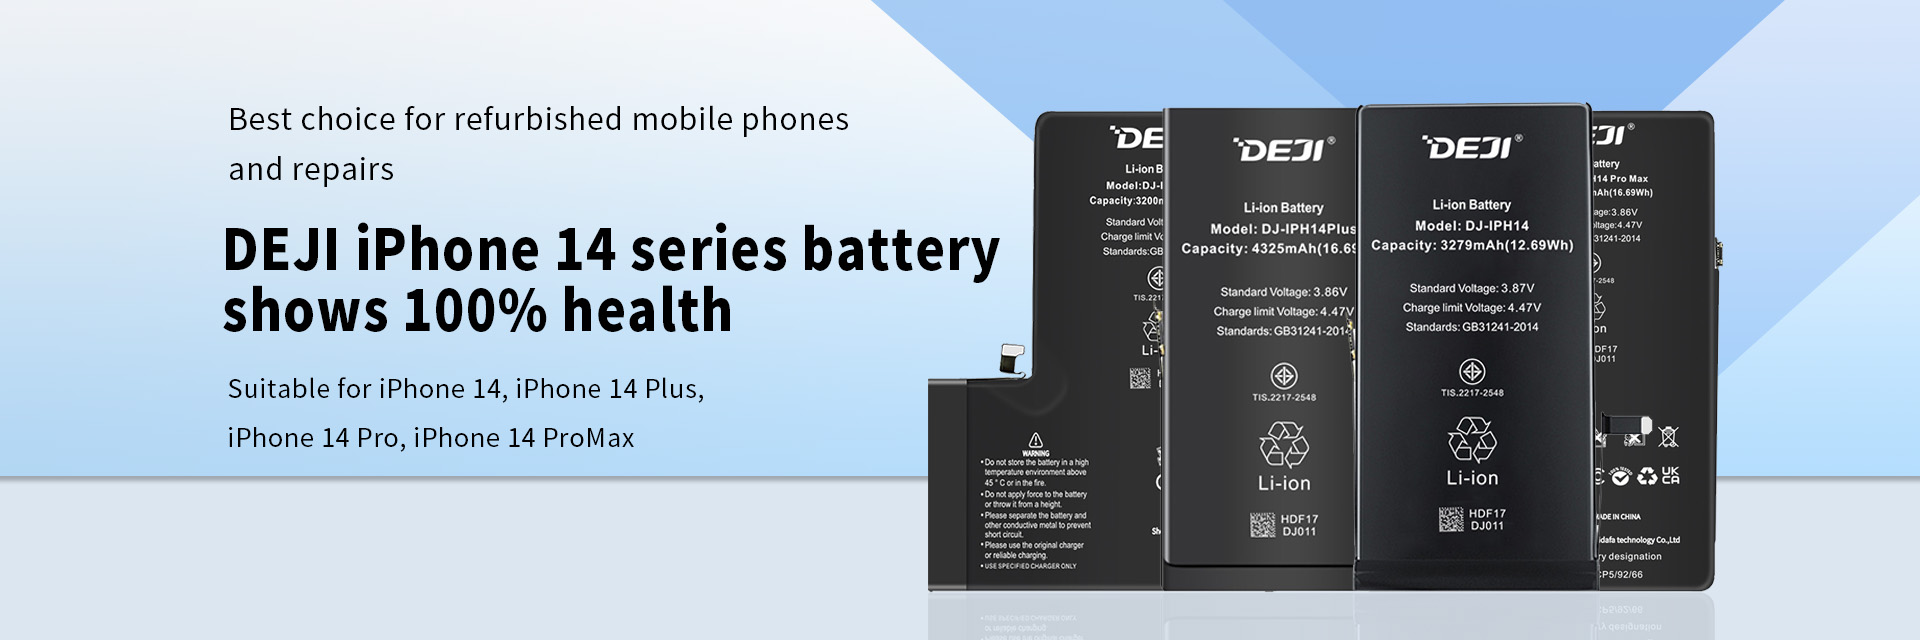 iPhone 14 Show 100% Health Battery